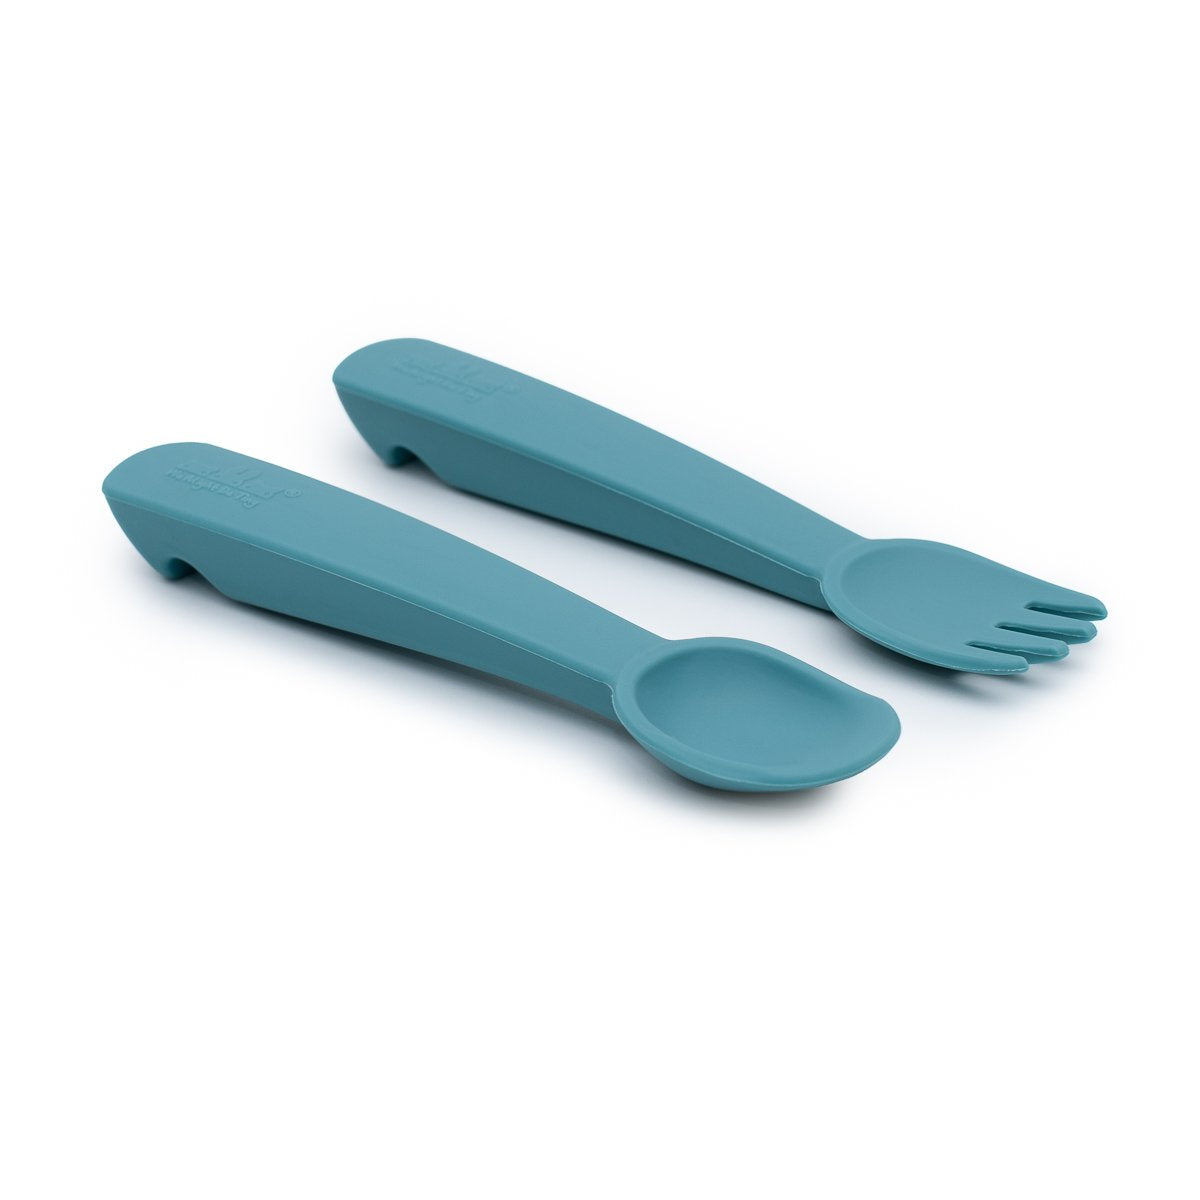 Feedie Fork & Spoon Set with Case - Blue Dusk - Little Reef and Friends